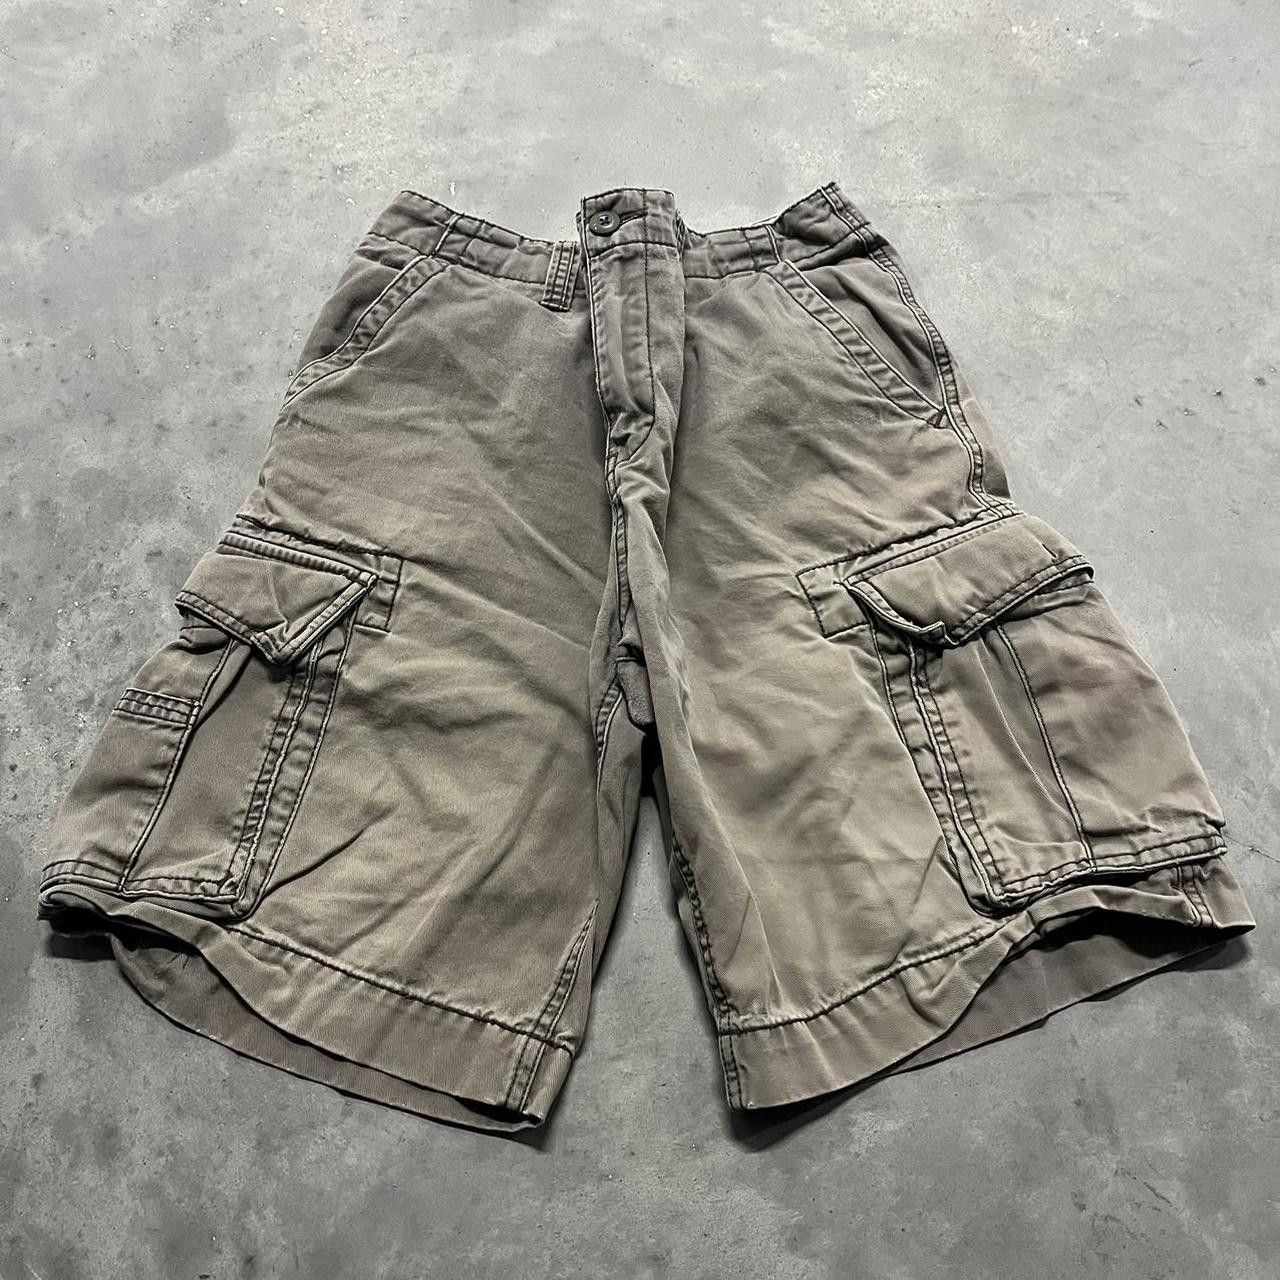 Pre-owned Vintage Crazy  Y2k/2000s Baggy Grunge Faded Khaki Skater Style Cargo Shorts!